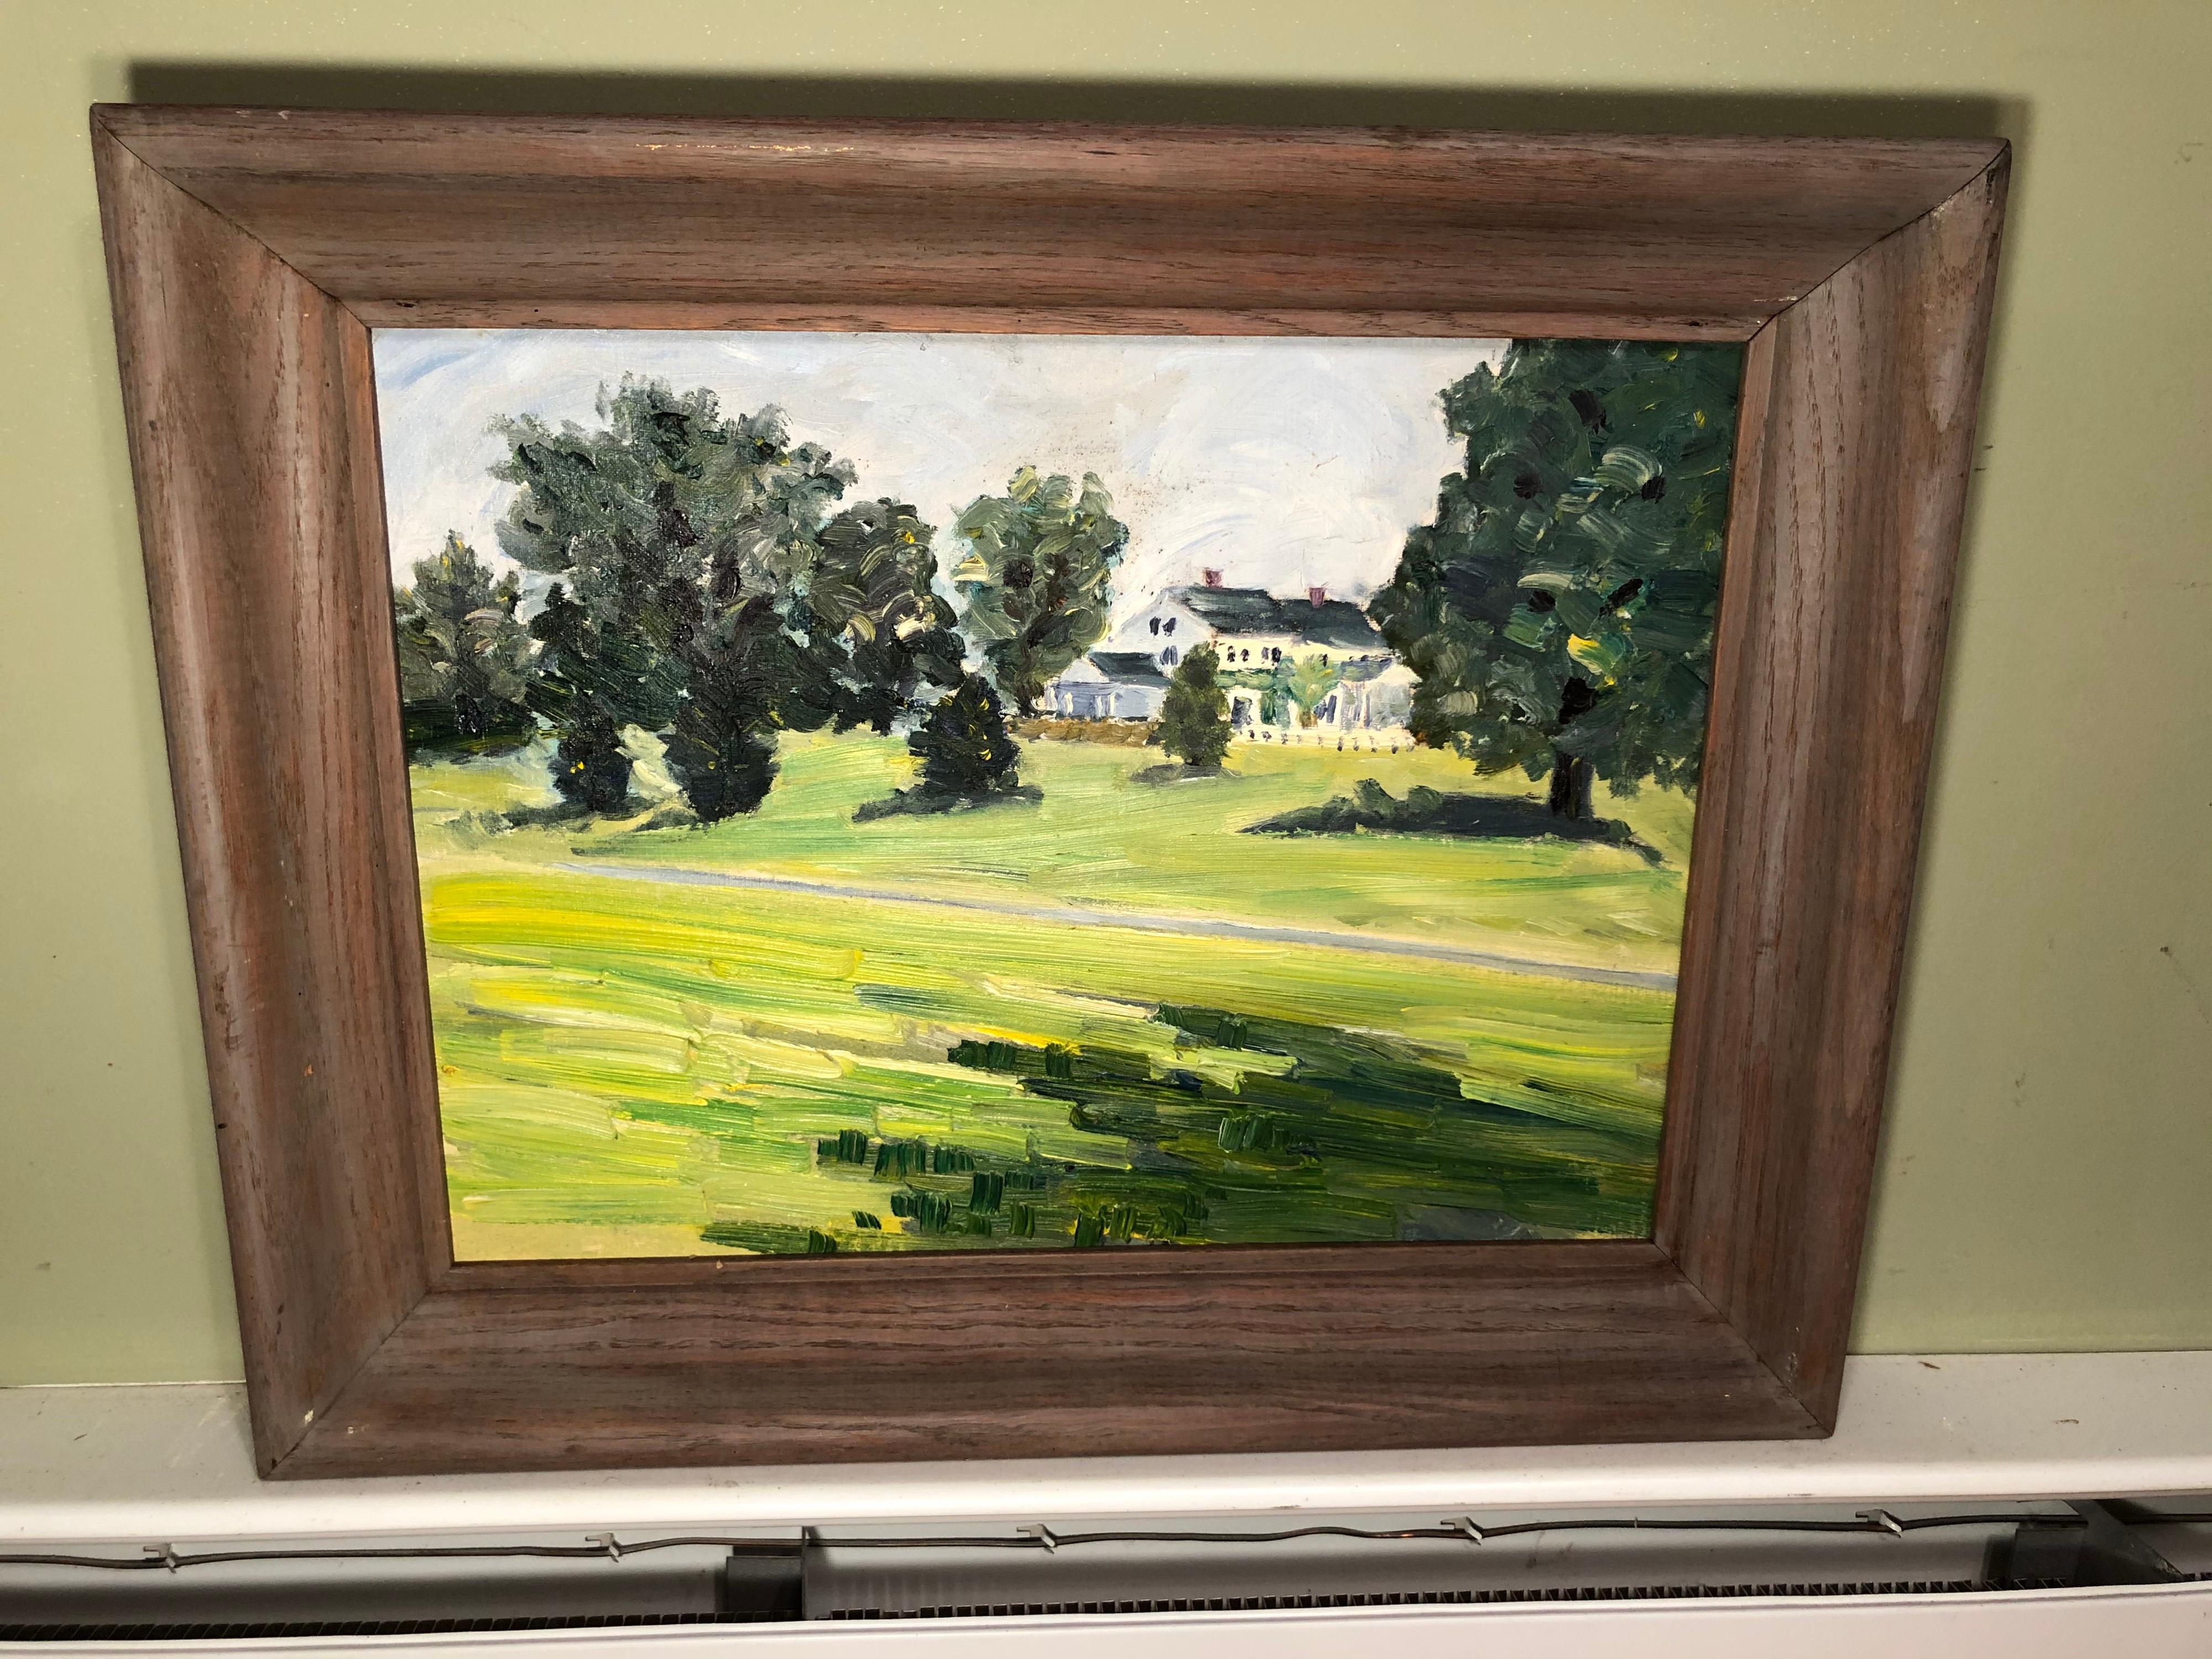 Oil on board of a Pastoral Scene with house. Nice impasto style composition. Unsigned and in a solid wooden frame.